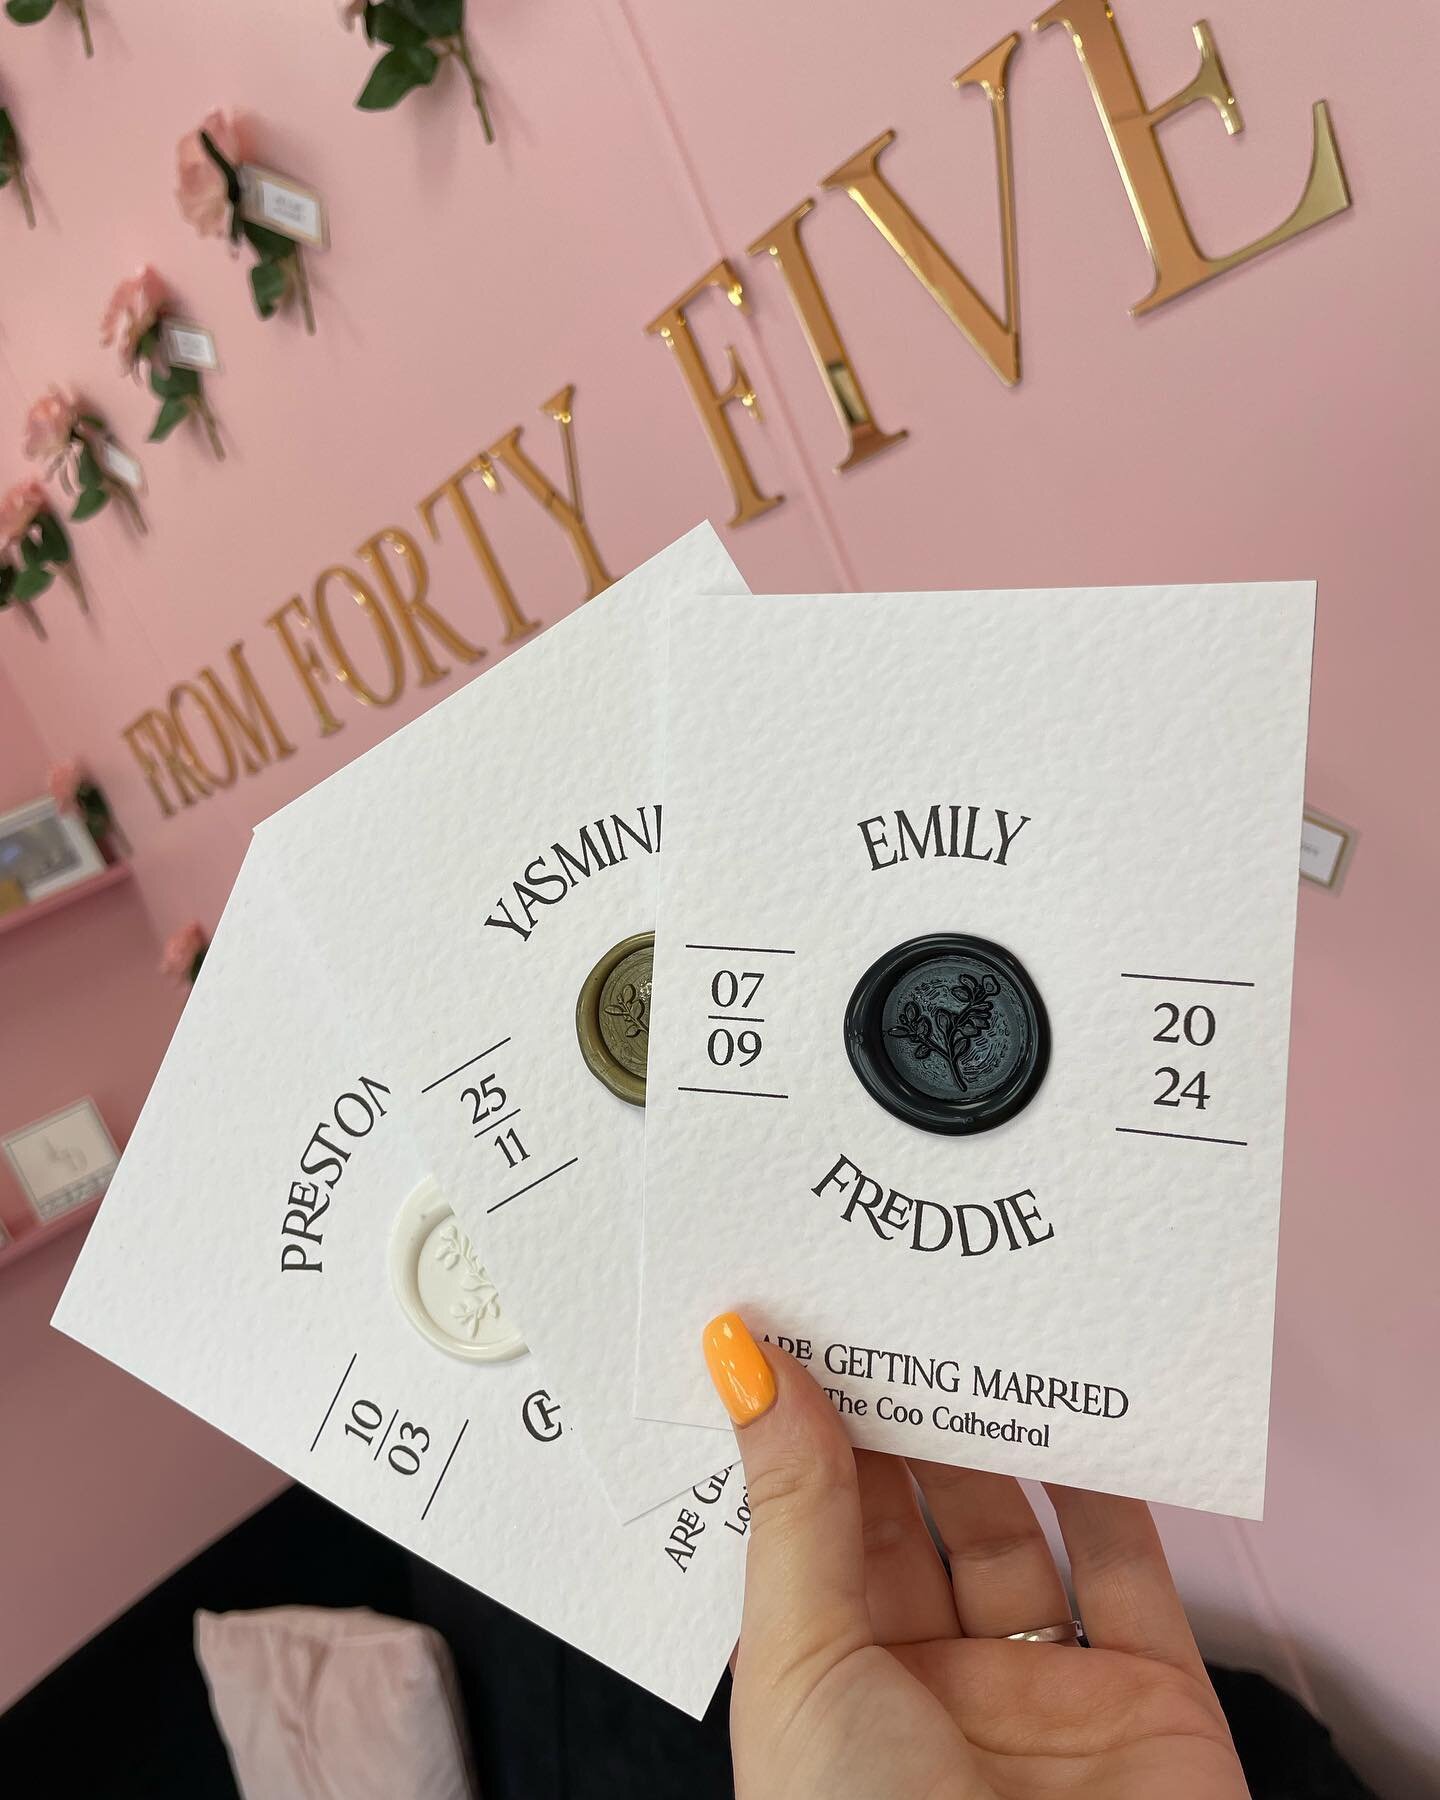 Online Stationery coming soon 🤩 

#savethedate #weddinginvitations #weddingstationery #luxurywedding #scottishweddings